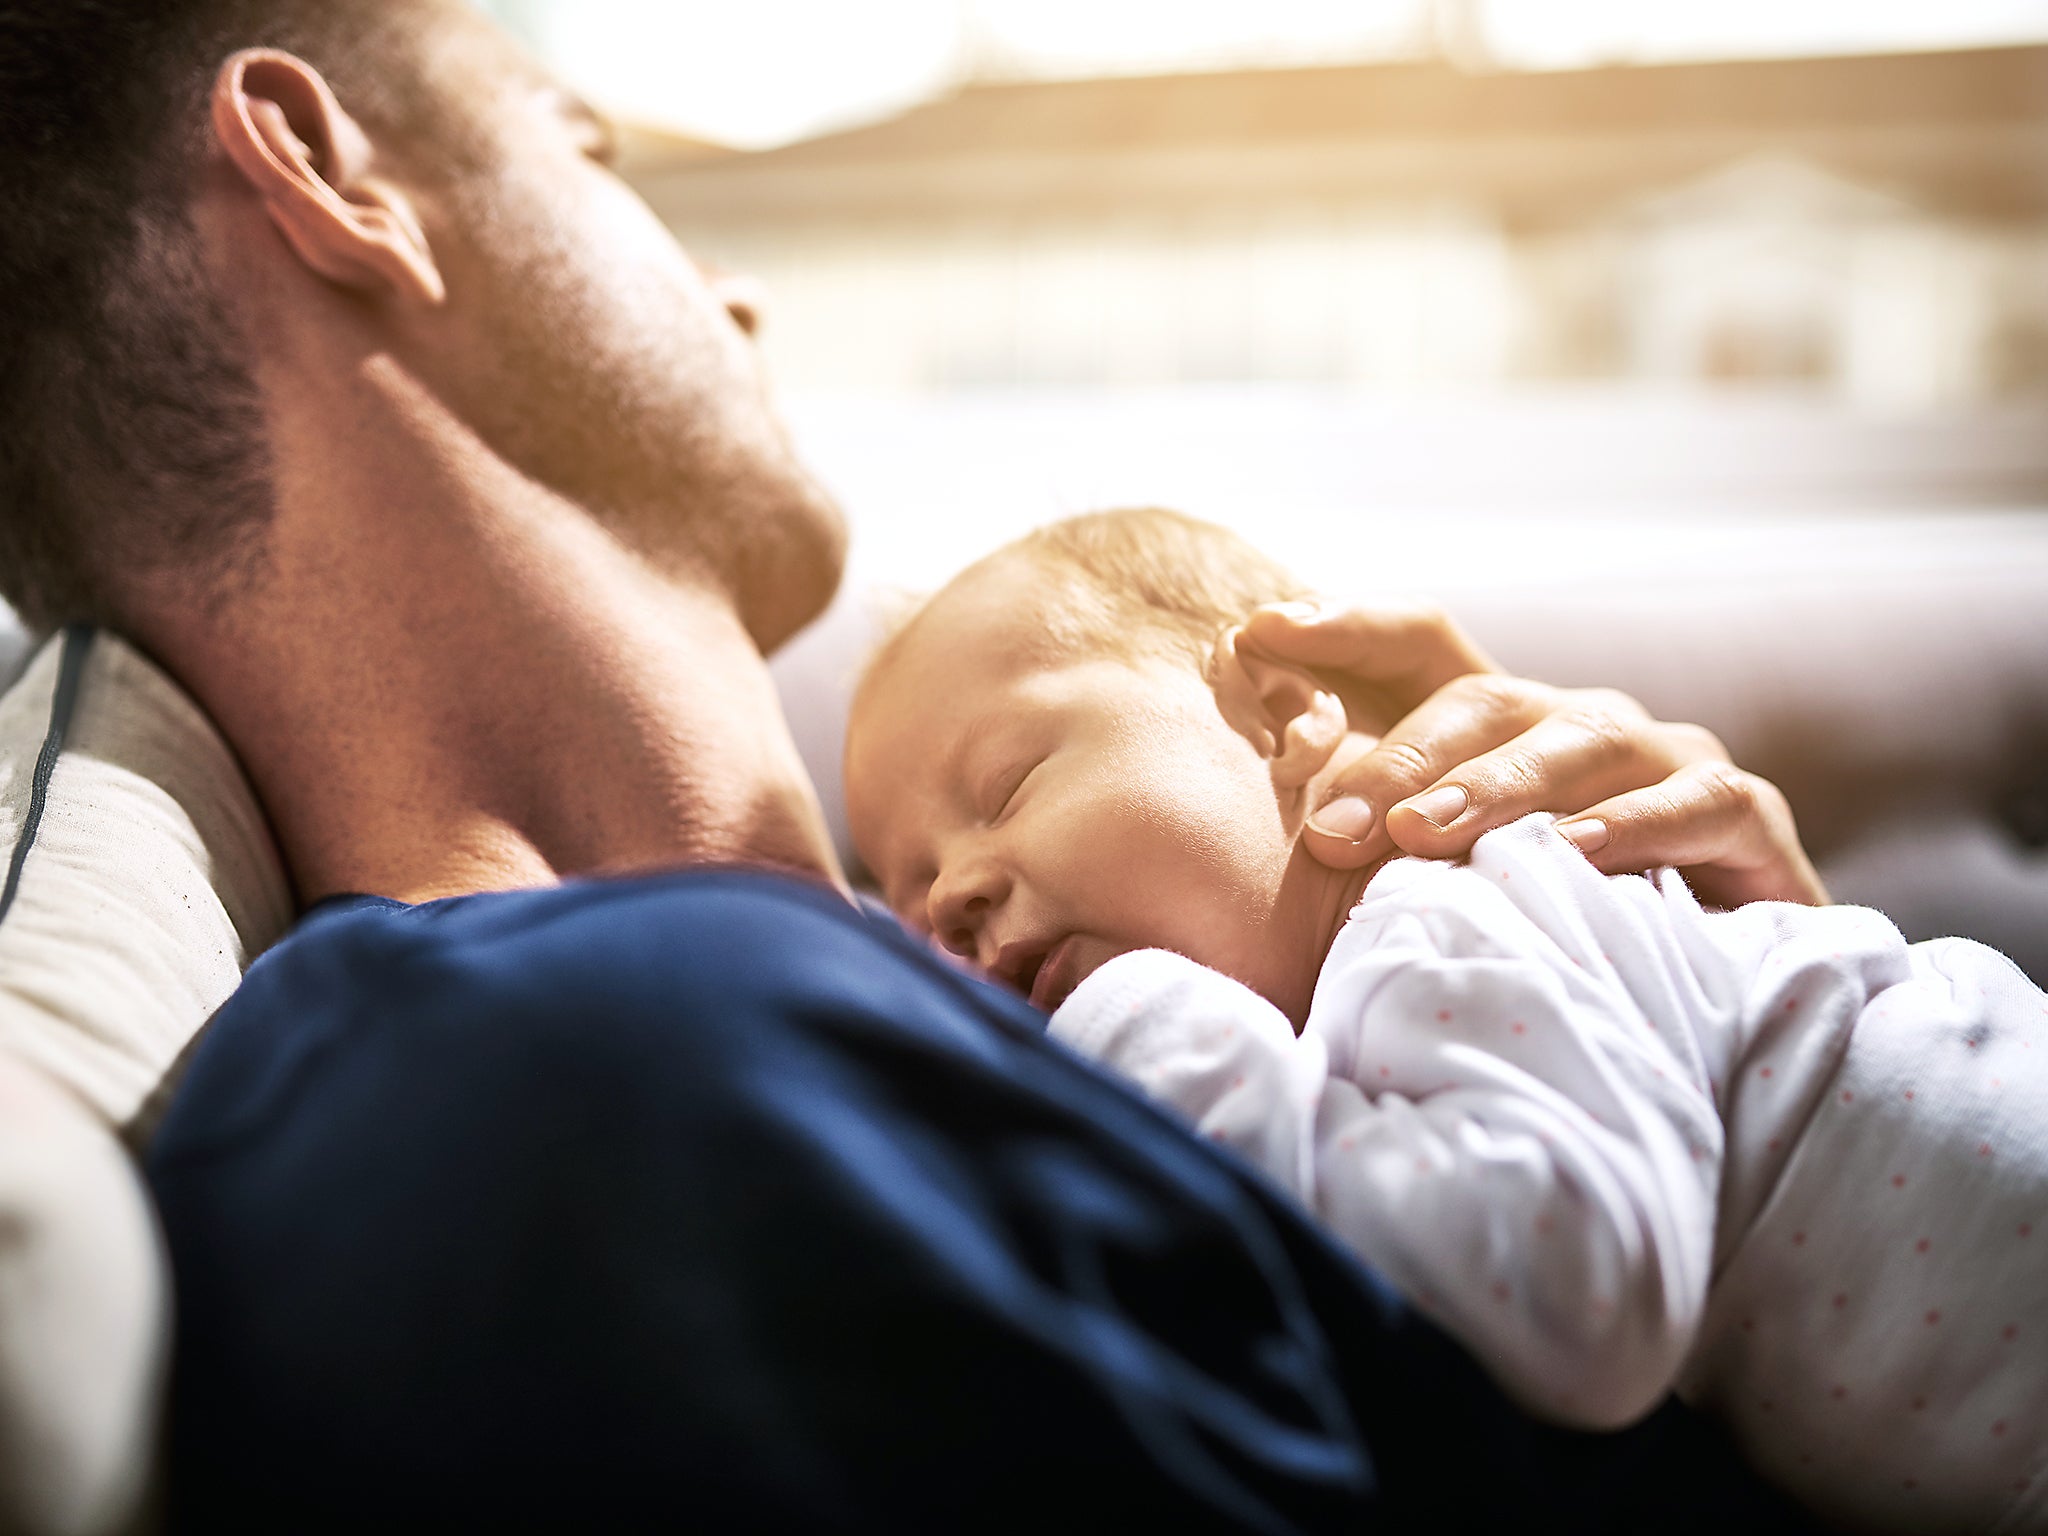 Sweden tops the list as the most generous country, offering 18 weeks of leave for new dads